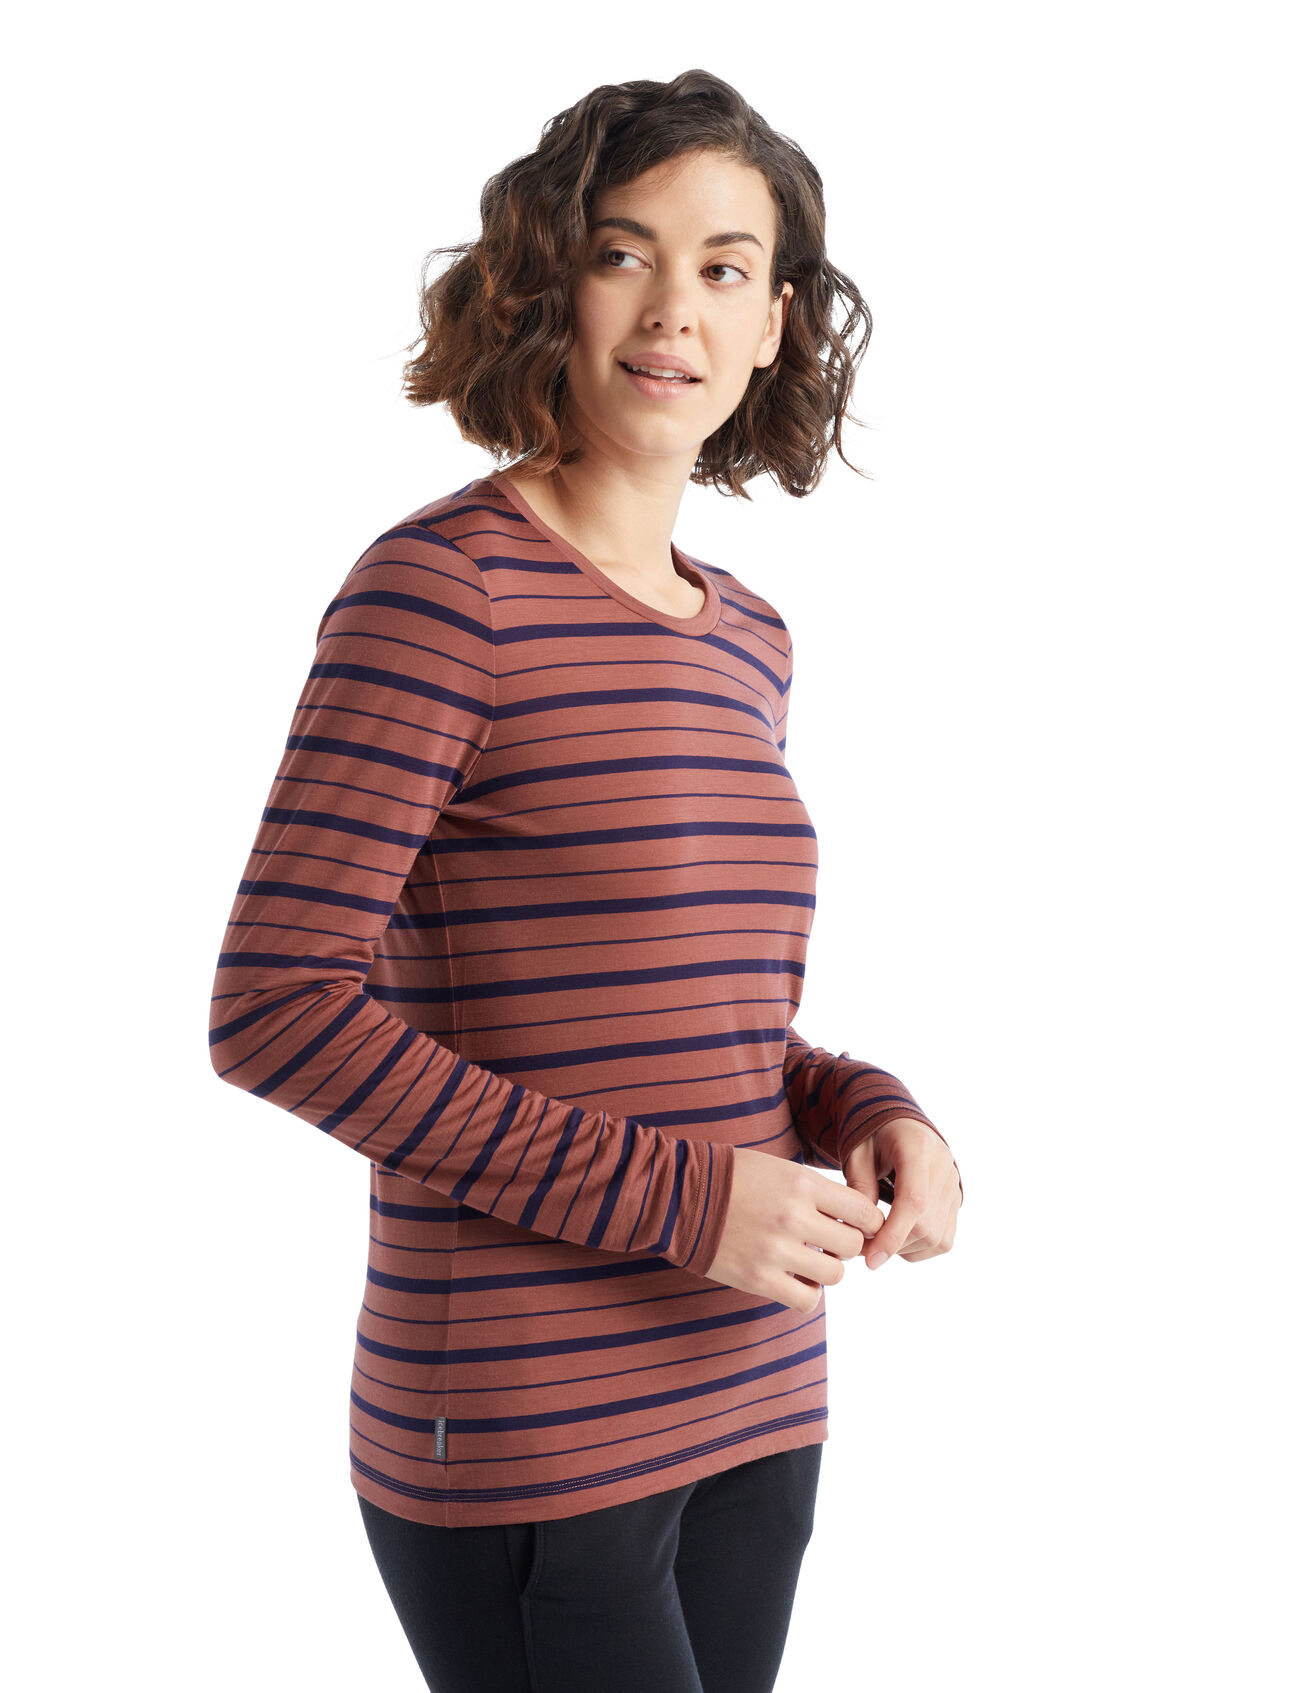 Womens Merino Wave Long Sleeve Stripe T-Shirt A lightweight merino-blend tee with classic style that's perfect for warm weather, the Wave Long Sleeve Tee Stripe features our breathable, all-natural Cool-Lite™ jersey fabric.